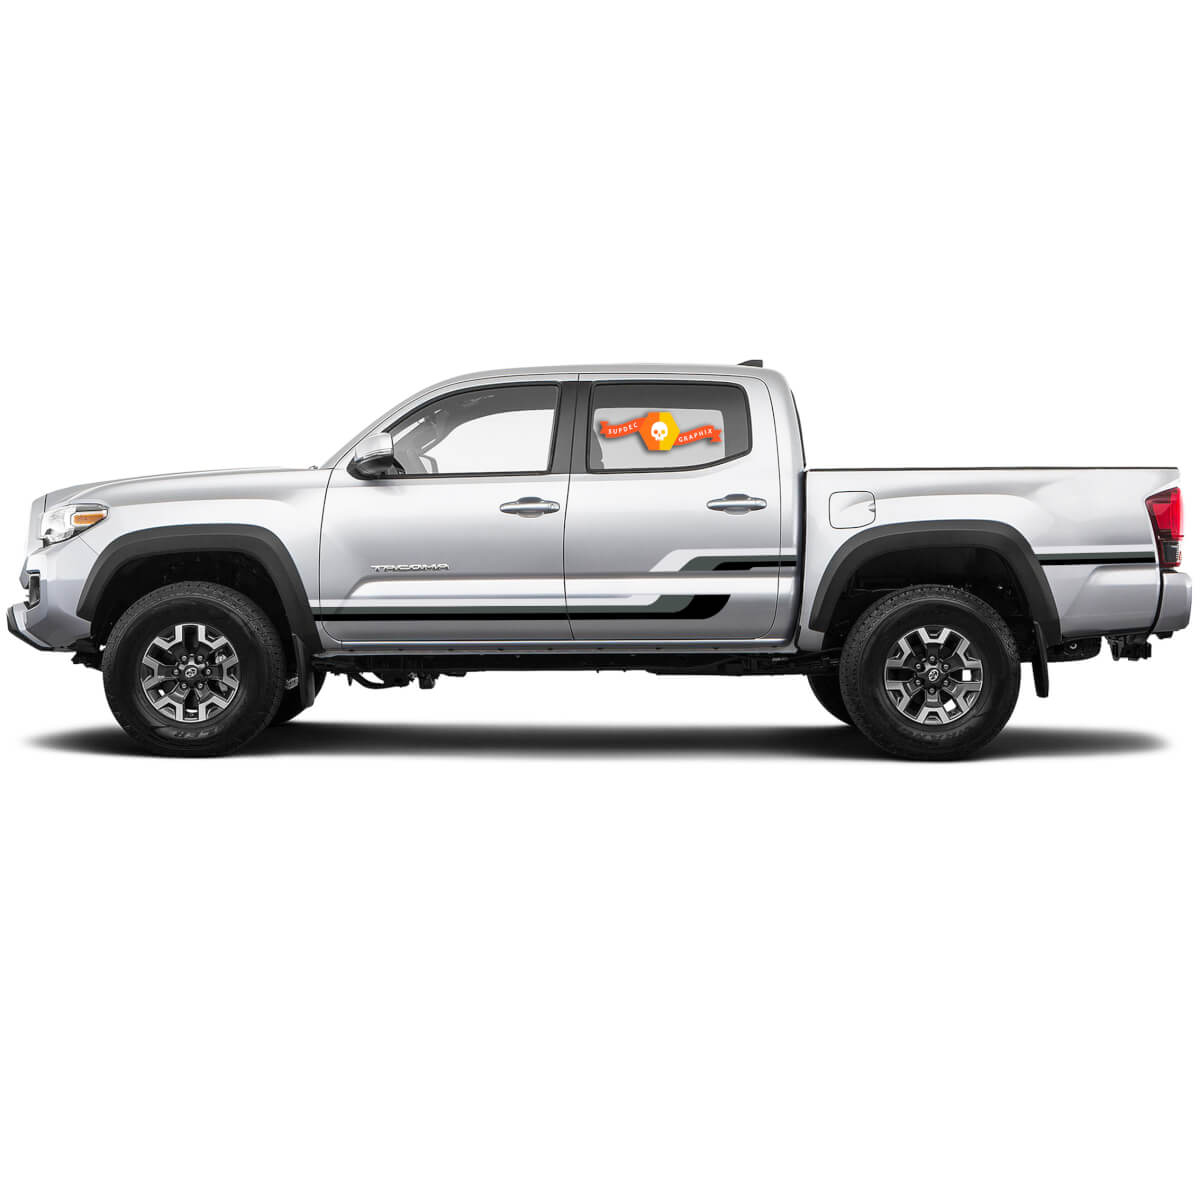 3 Colors Stripes for Tacoma Retro Side and Bed Vinyl Stickers Decal fit to Toyota Tacoma Toyota Truck